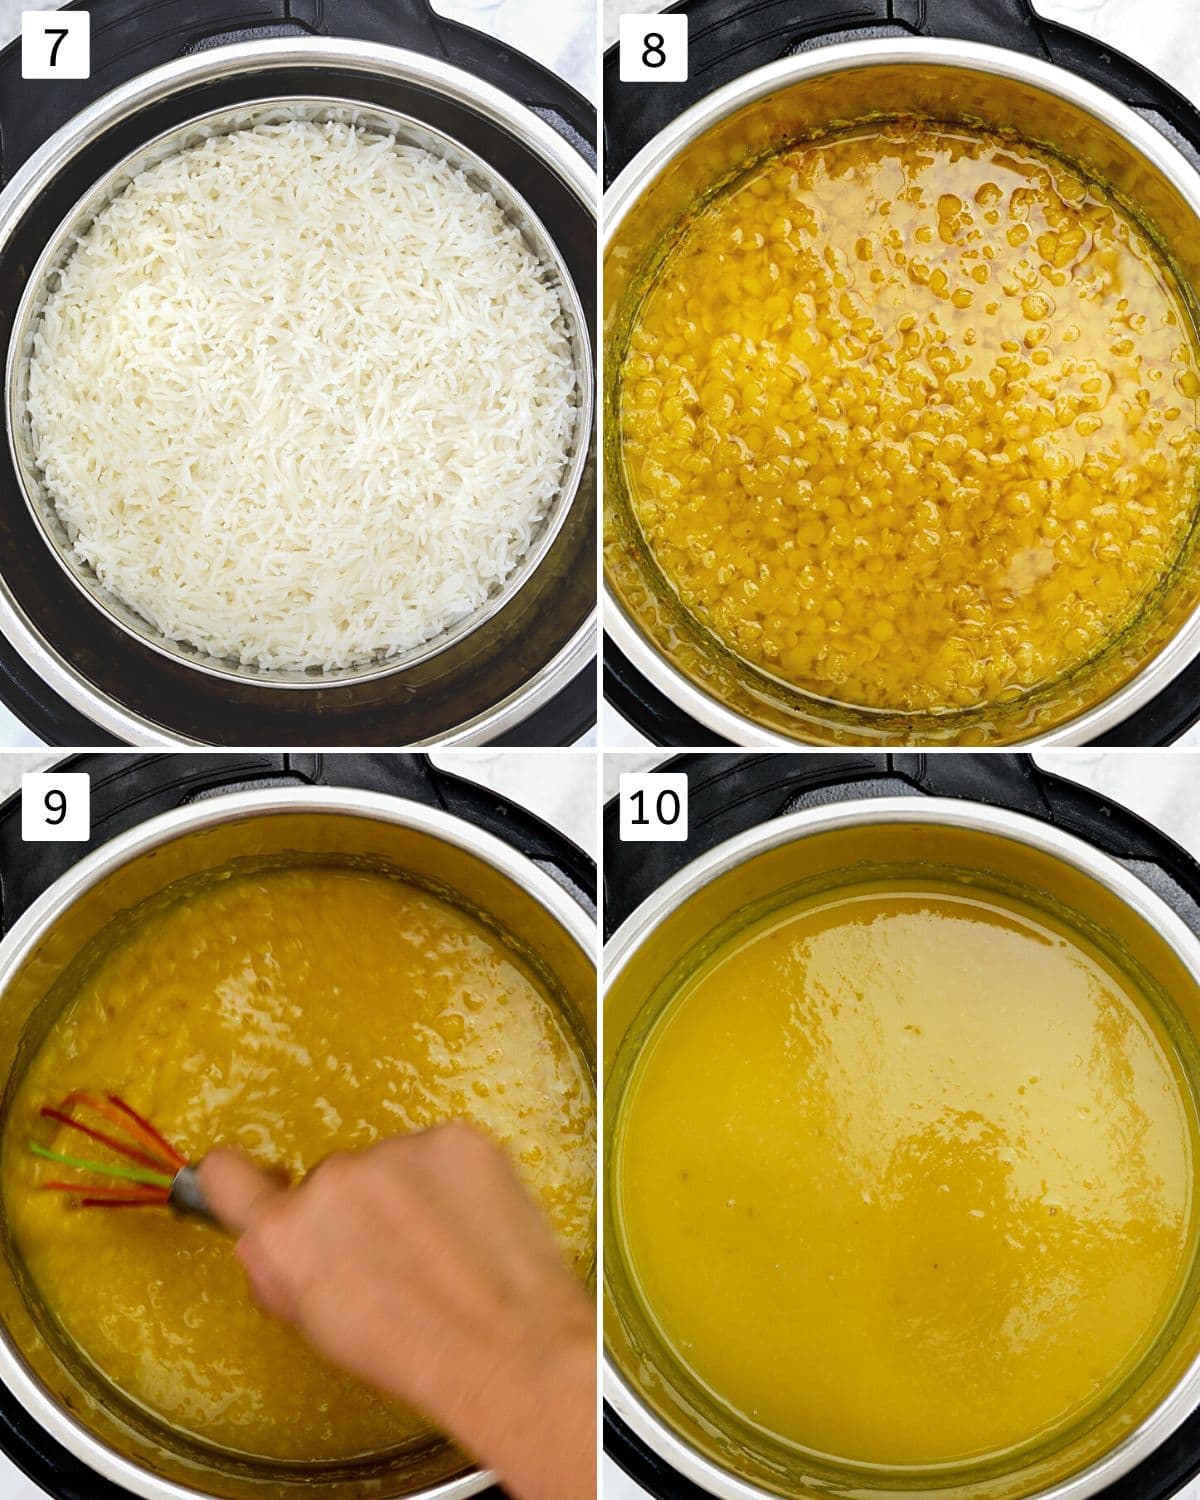 Collage of 4 images showing cooked rice and dal, mashing dal.